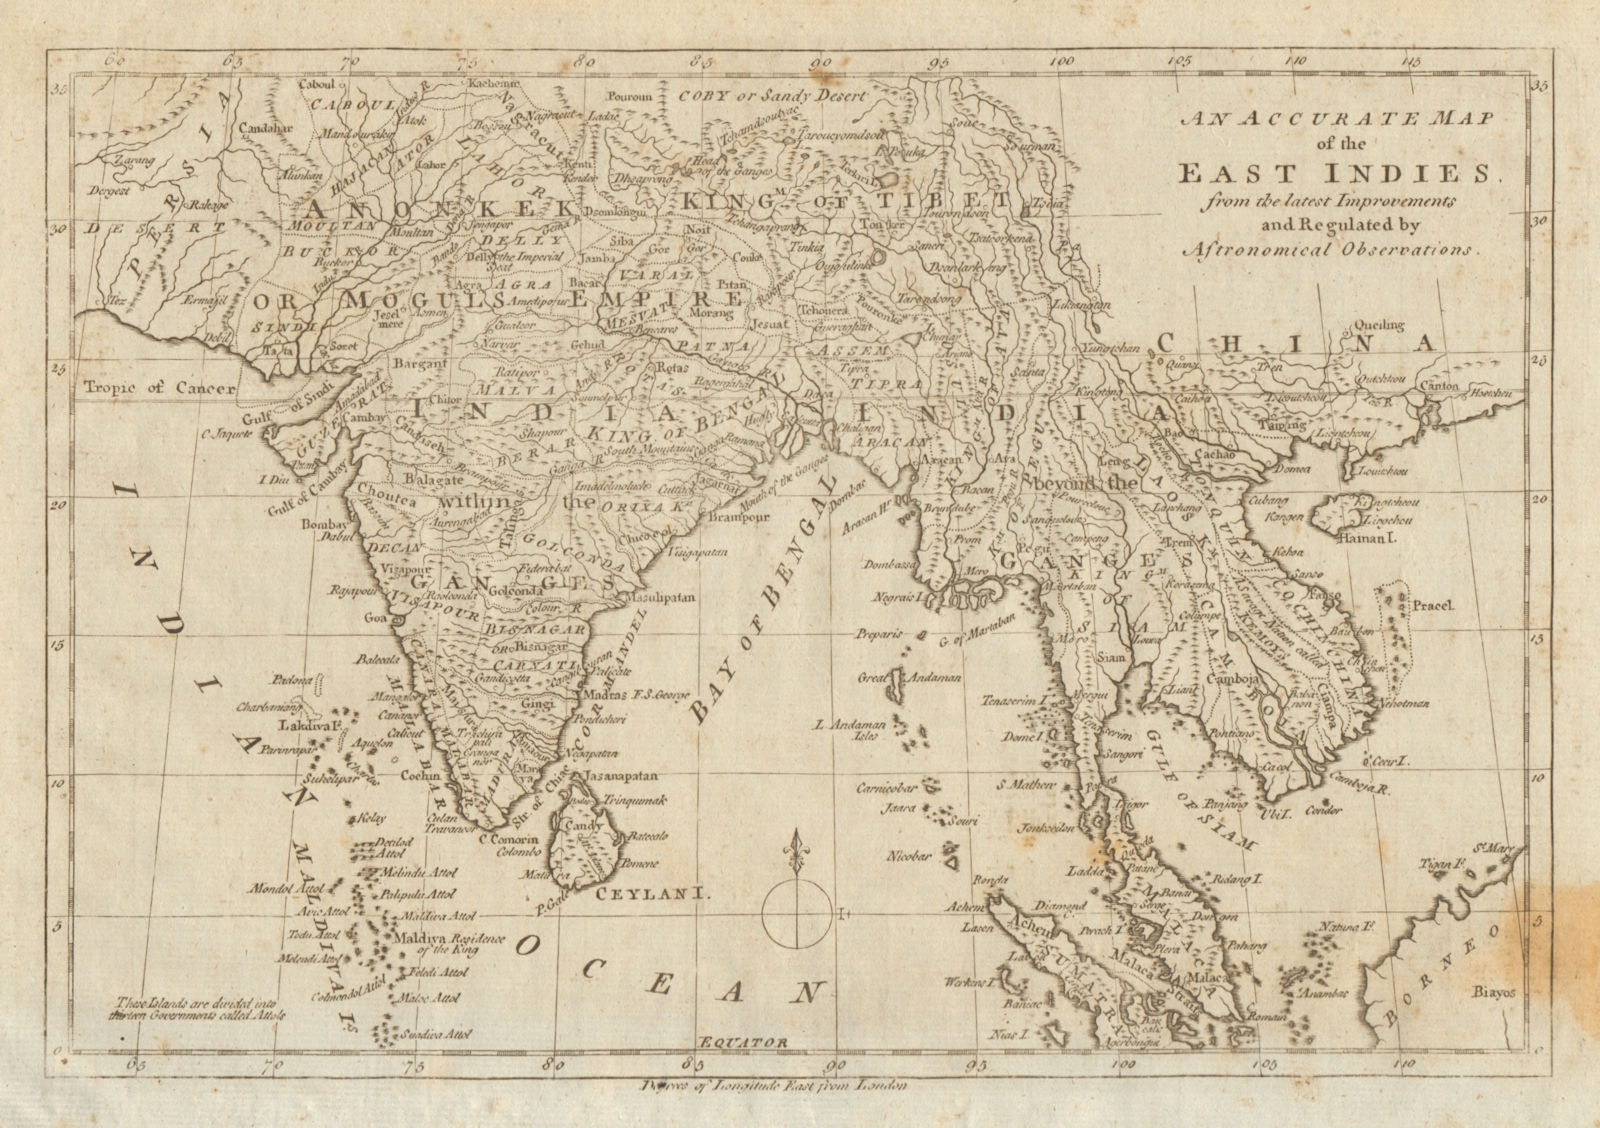 Associate Product An accurate map of the East Indies from the latest improvements. BOWEN 1789